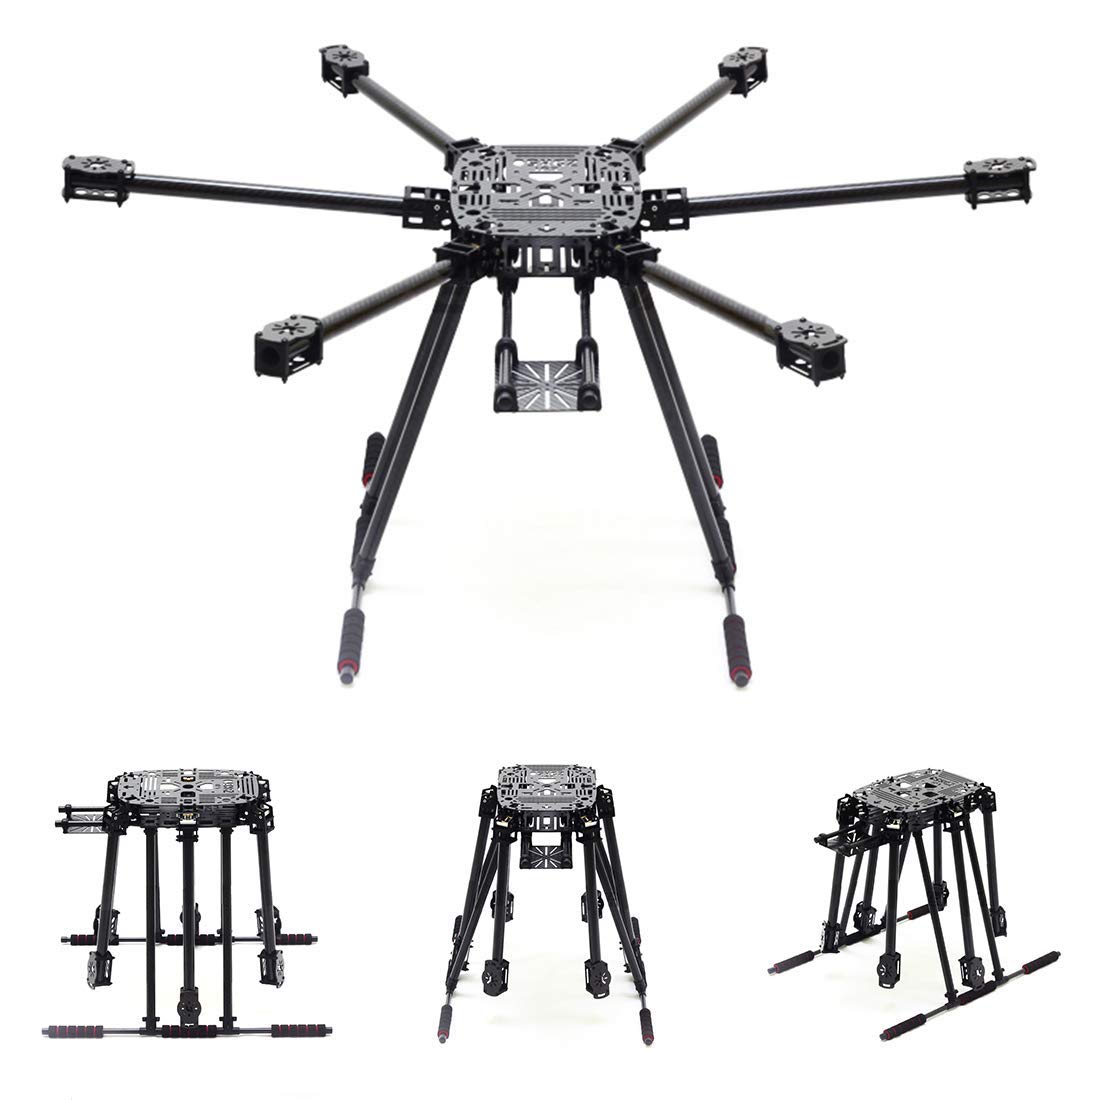 JMT ZD850 850mm 6 Axle Full Carbon Fiber Frame Kit with Unflodable Landing Gear Foldable Arm ZD 850 for DIY FPV Aircraft Hexacopter